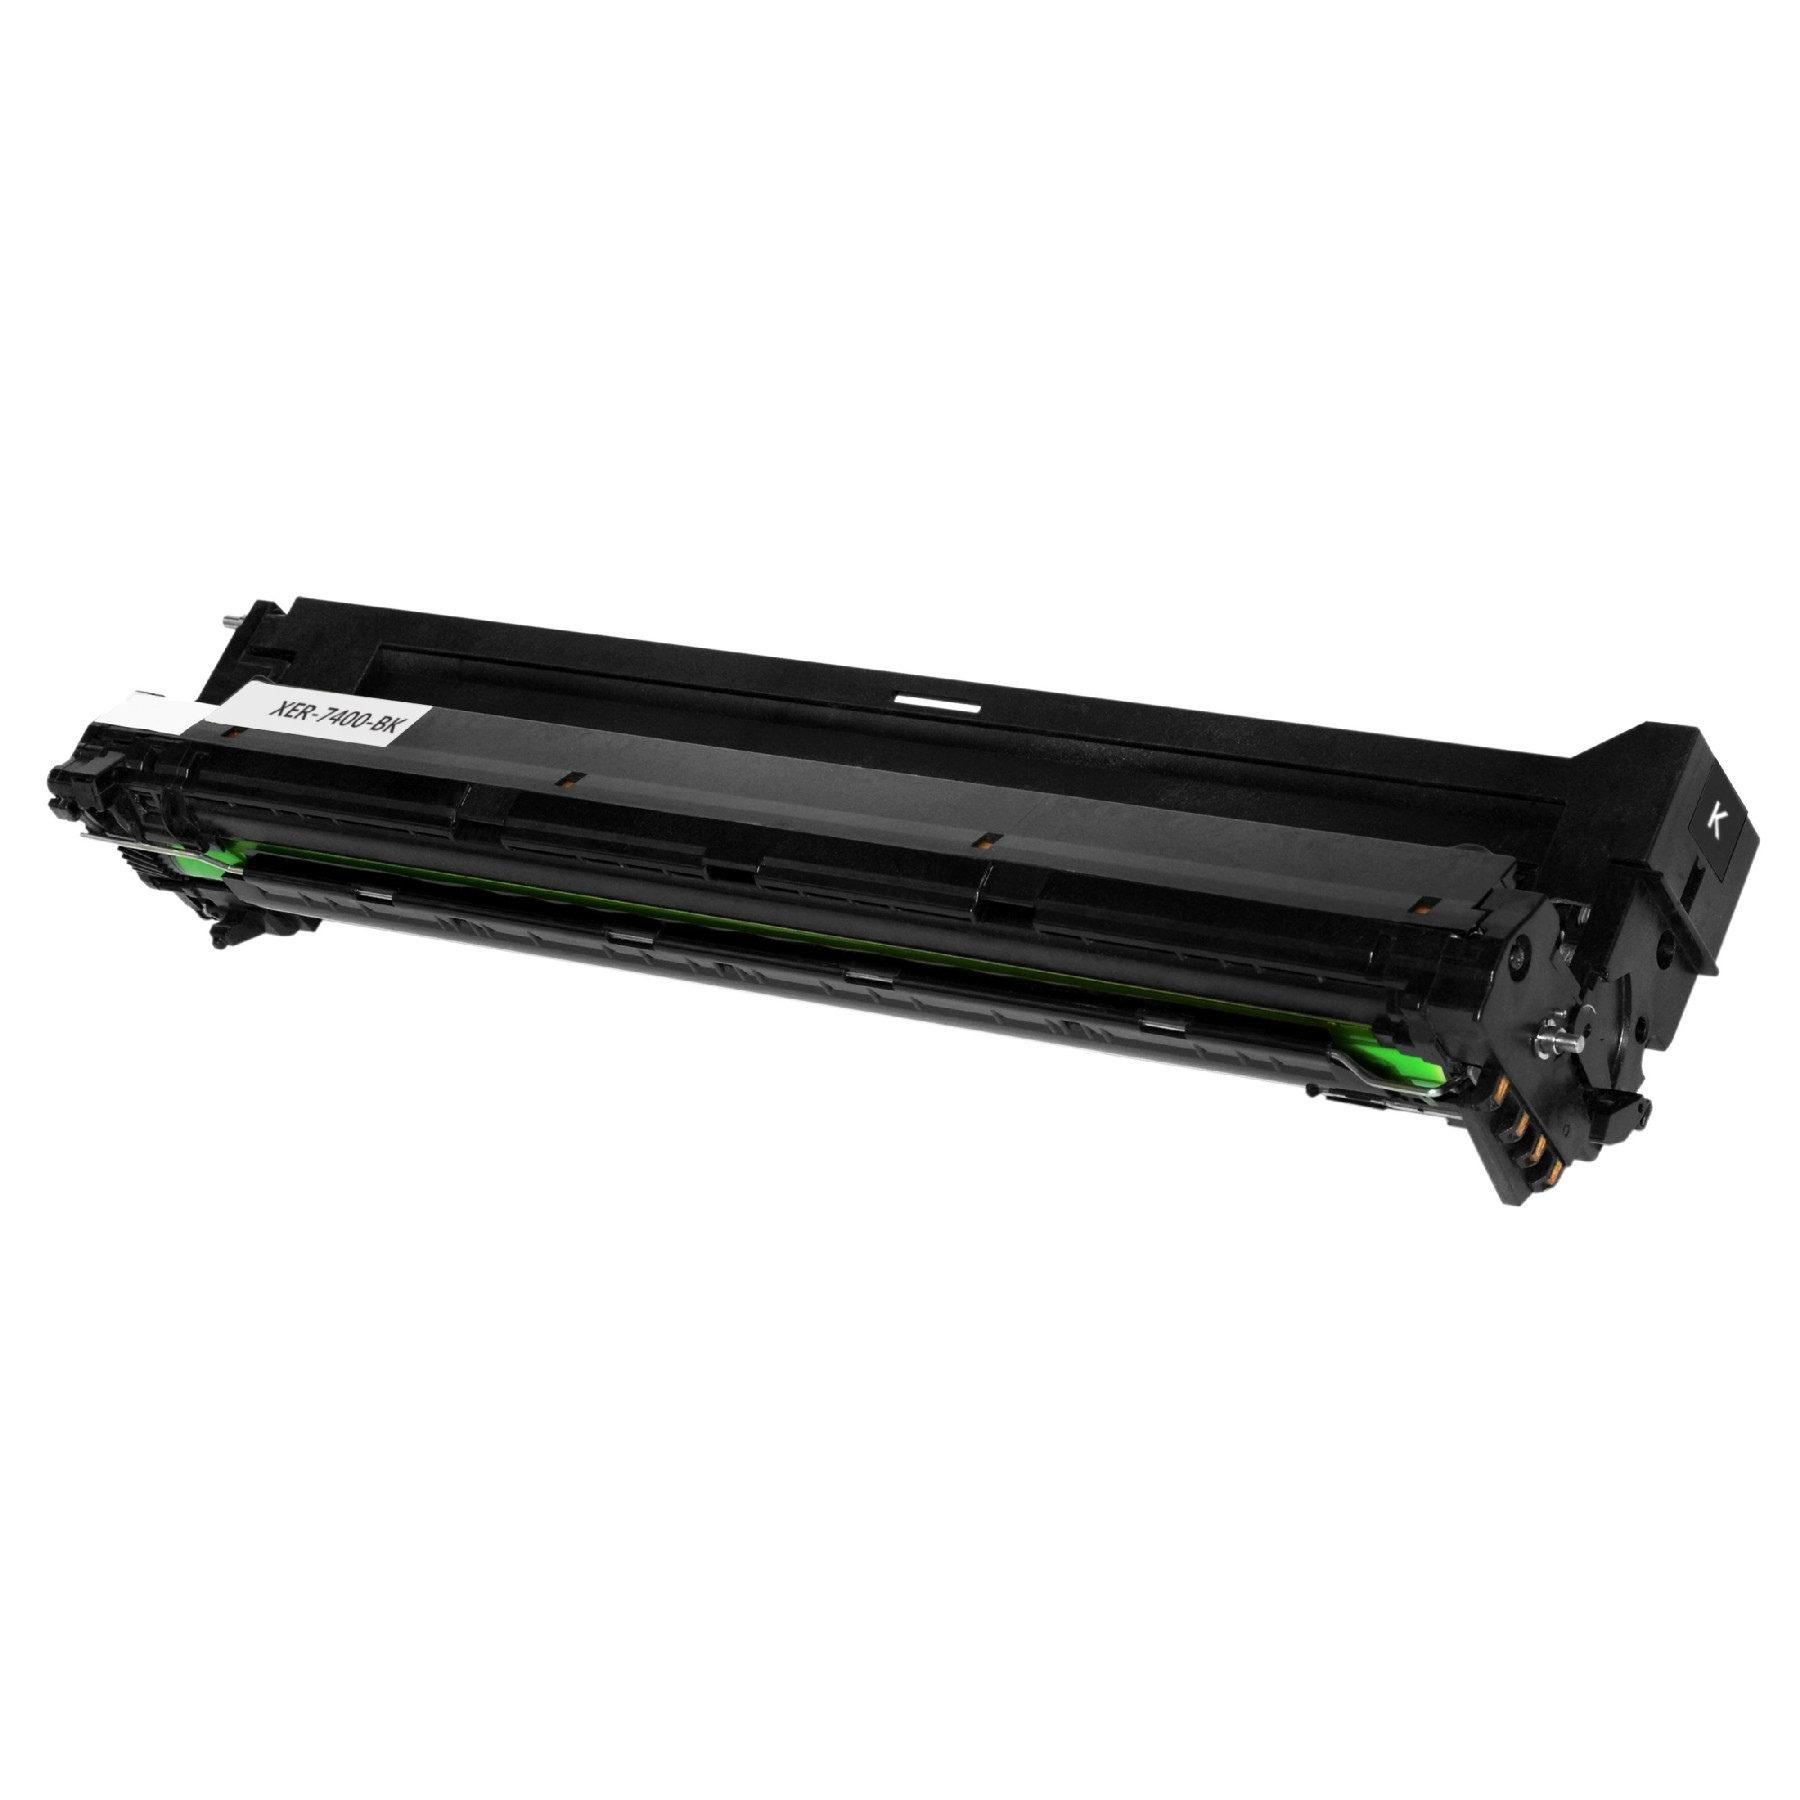 Set consisting of Drum unit (alternative) compatible with XEROX 108R00650 black, 108R00647 cyan, 108R00648 magenta, 108R00649 yellow - Save 6%